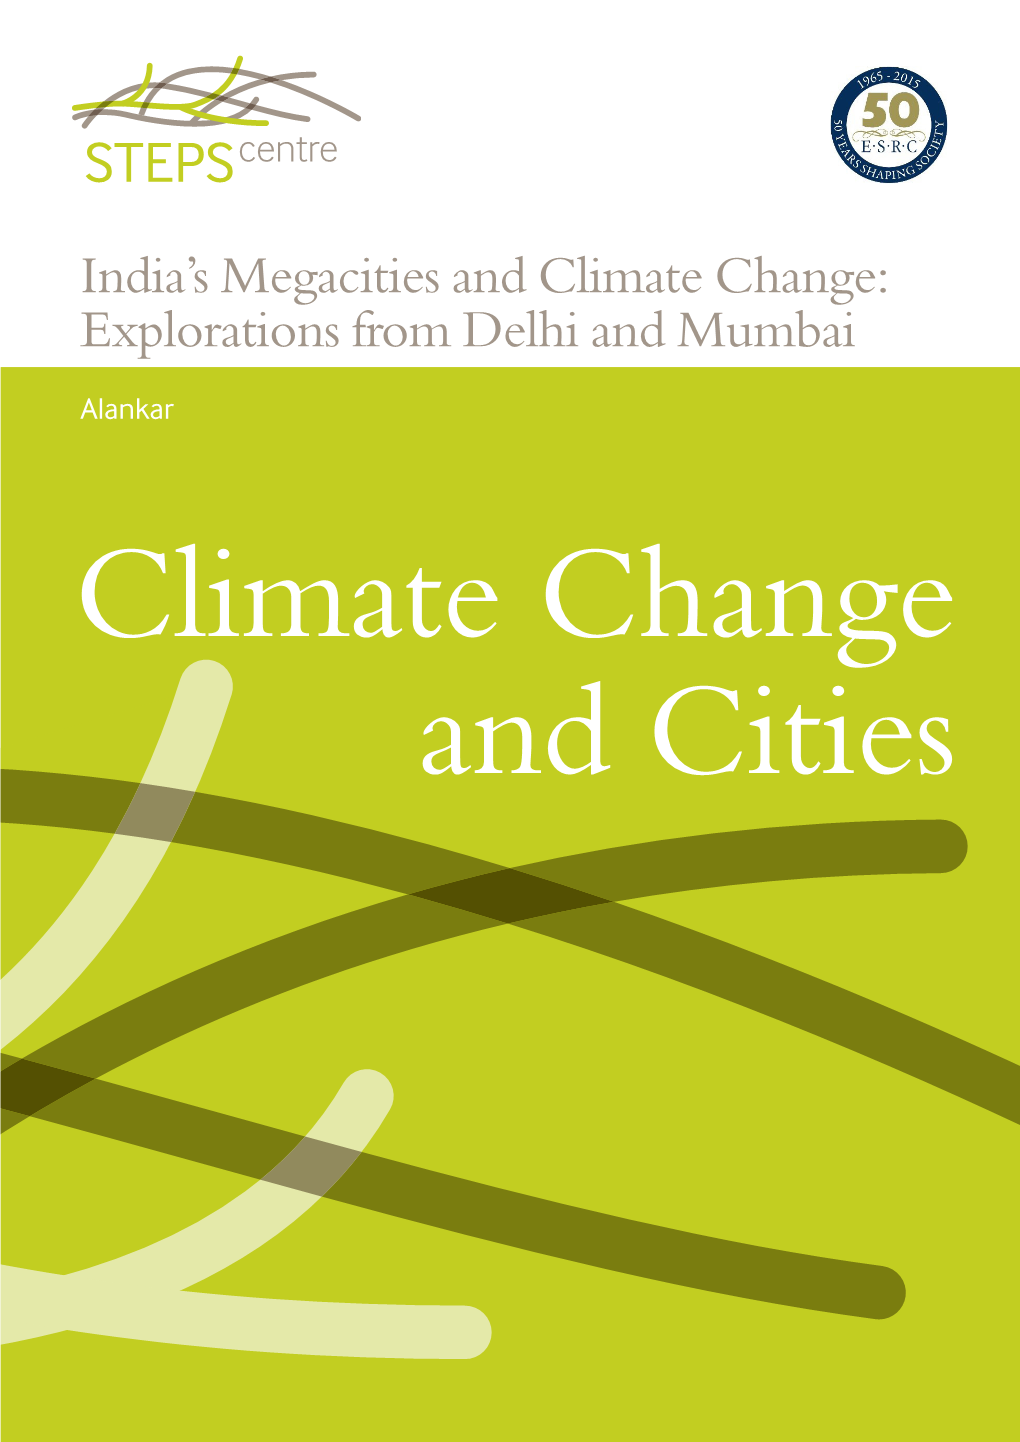 India's Megacities and Climate Change: Explorations from Delhi